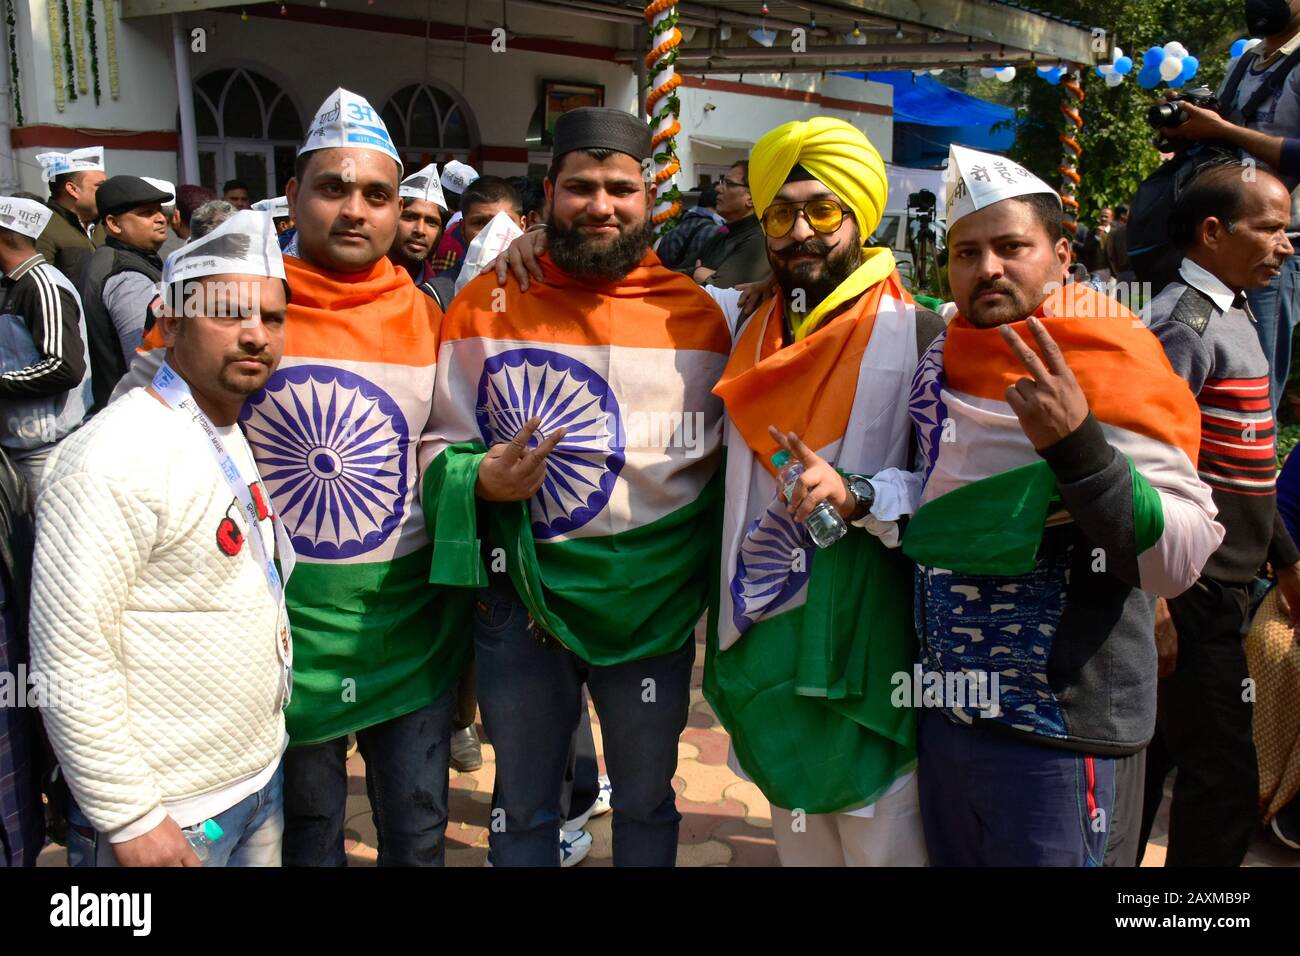 February 11, 2020: Supporters of Aam Aadmi Party (AAP) from different  religions celebrate the victory in regional elections in India's capital  New Delhi on 11 February 2020. AAP supporters gathered and celebrated